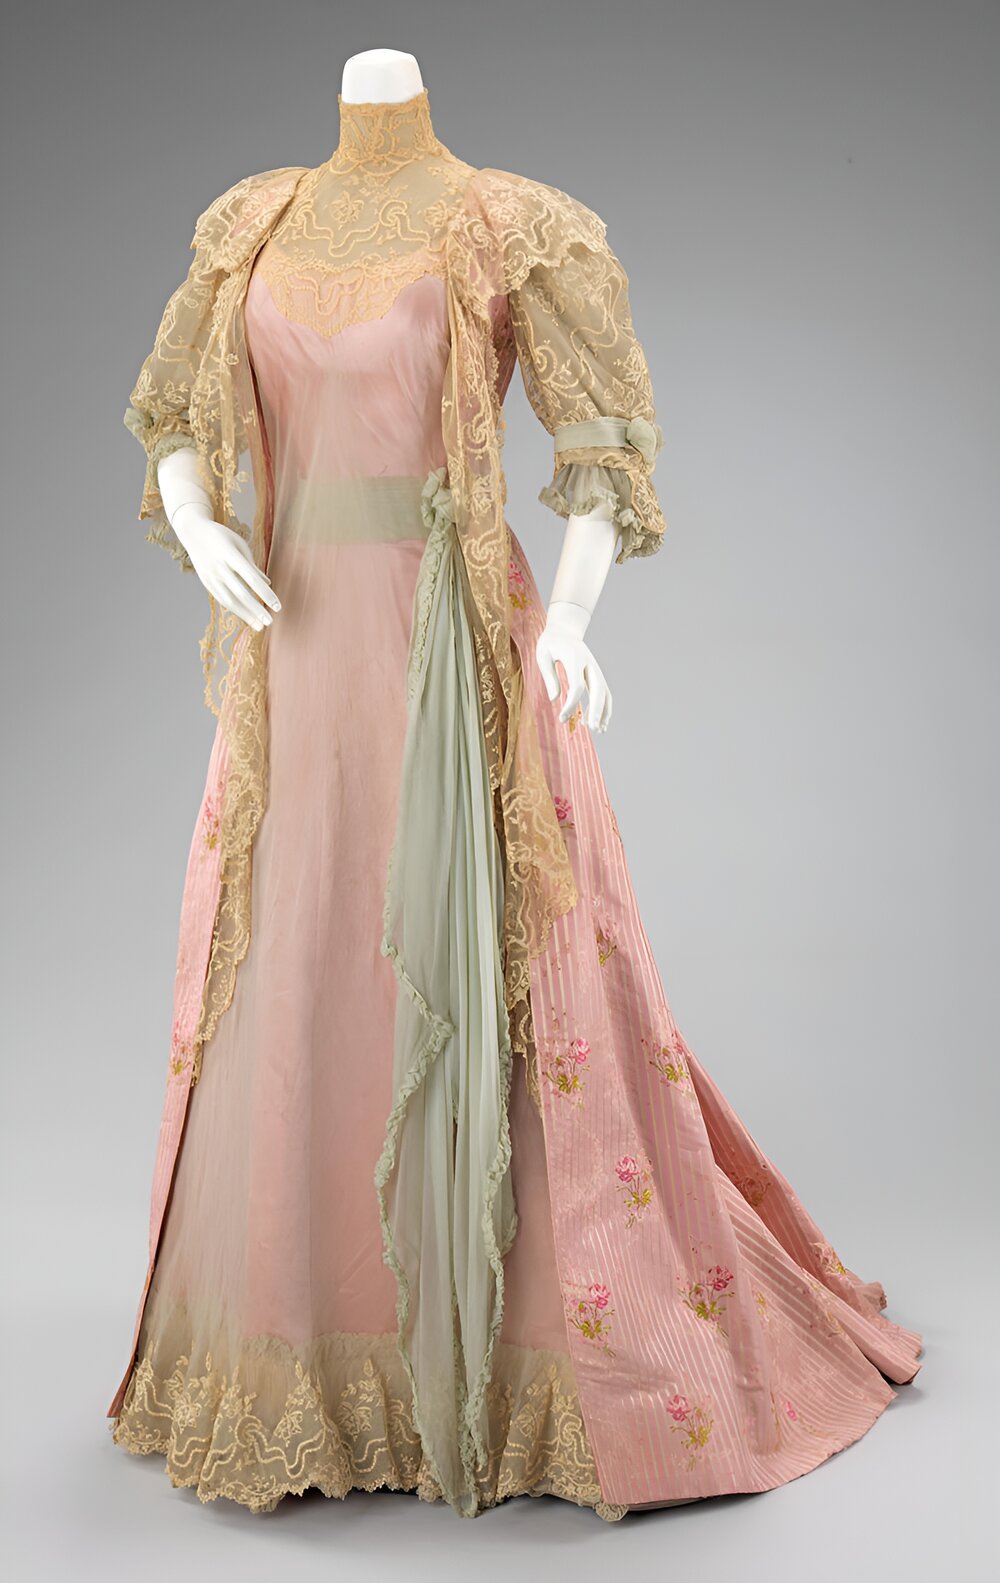 1900 Tea gown. French. House of Worth. metmuseum